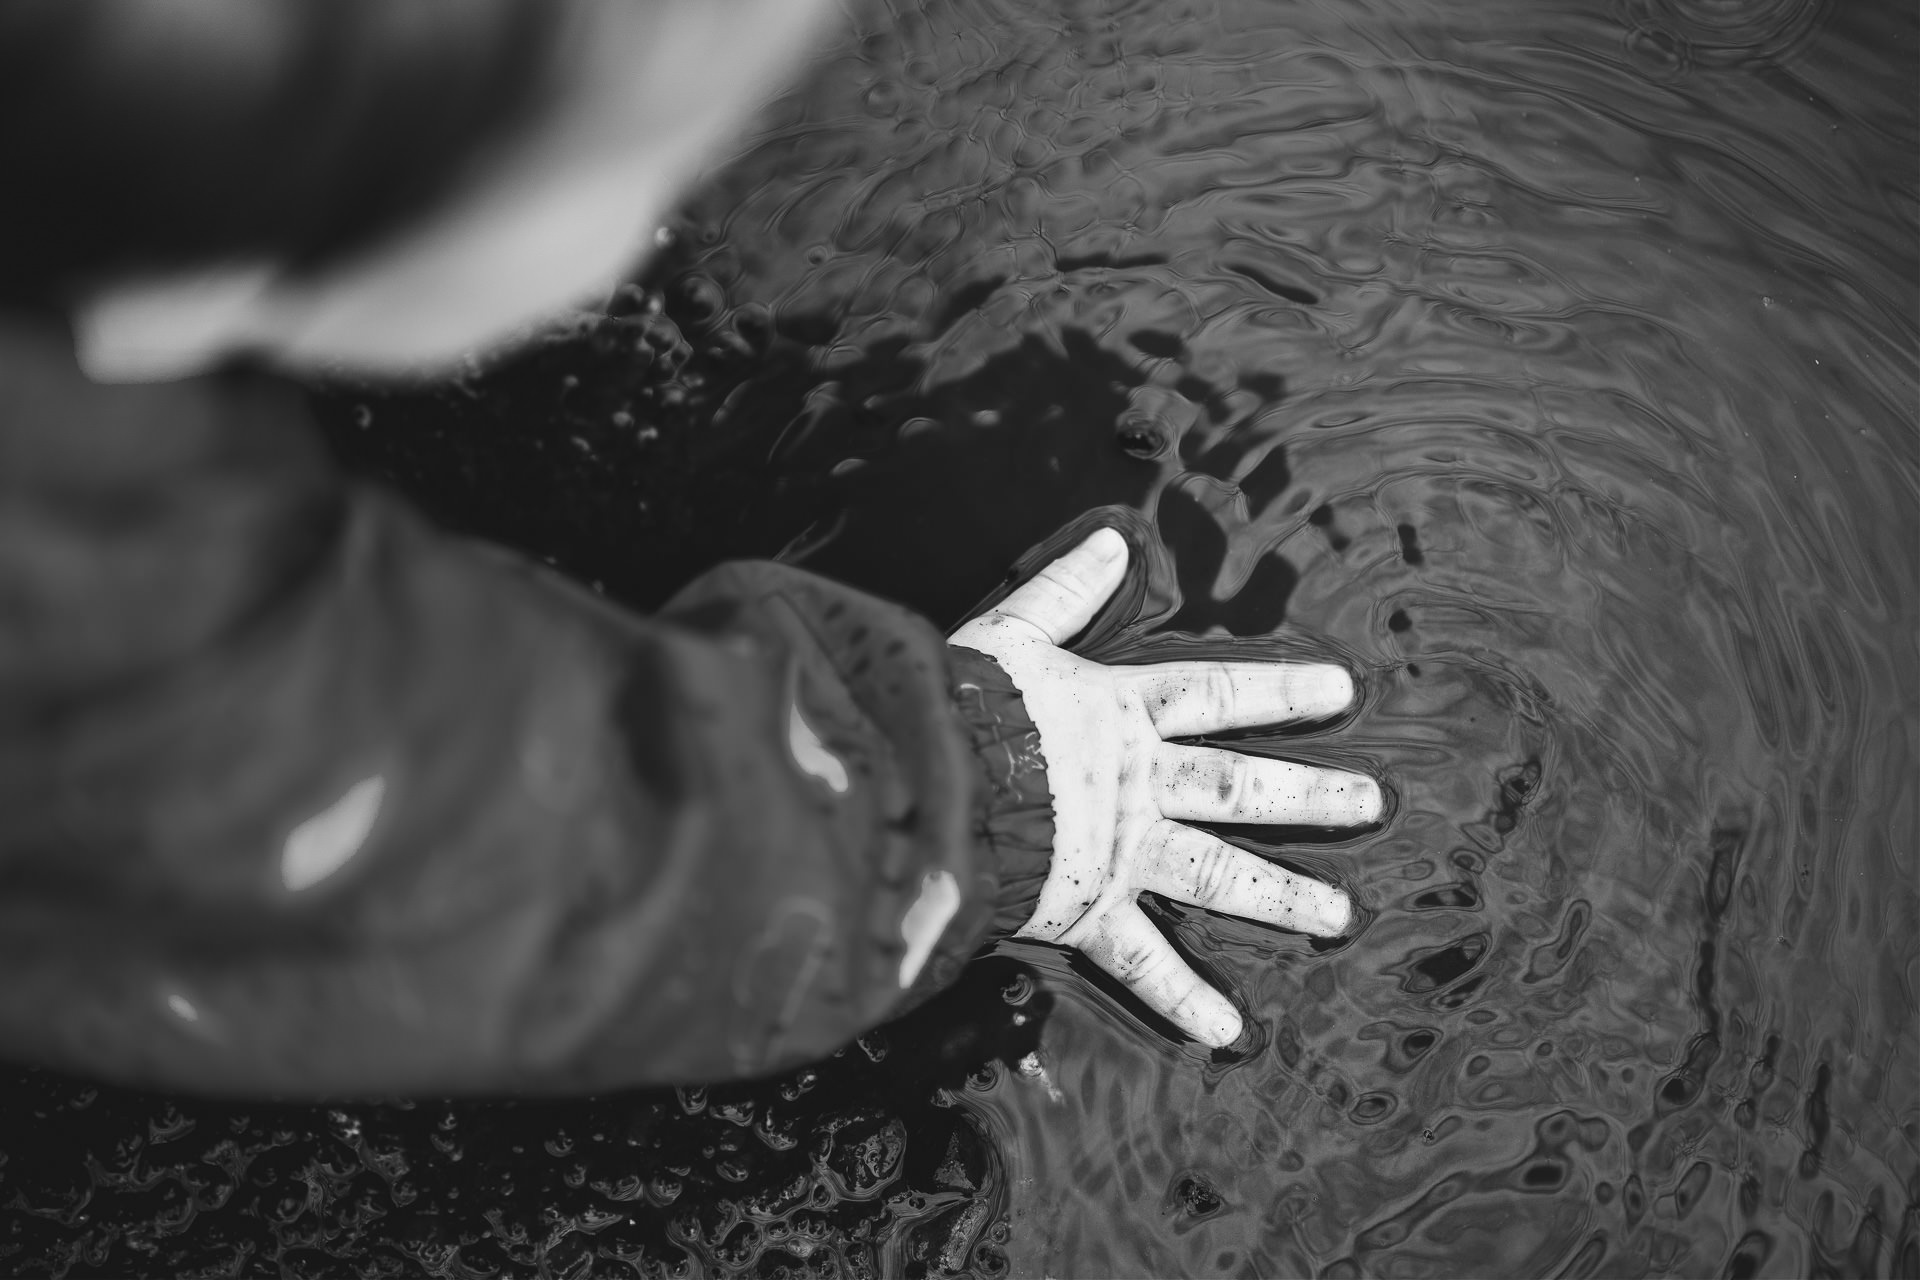 A baby's hand in a muddy puddle